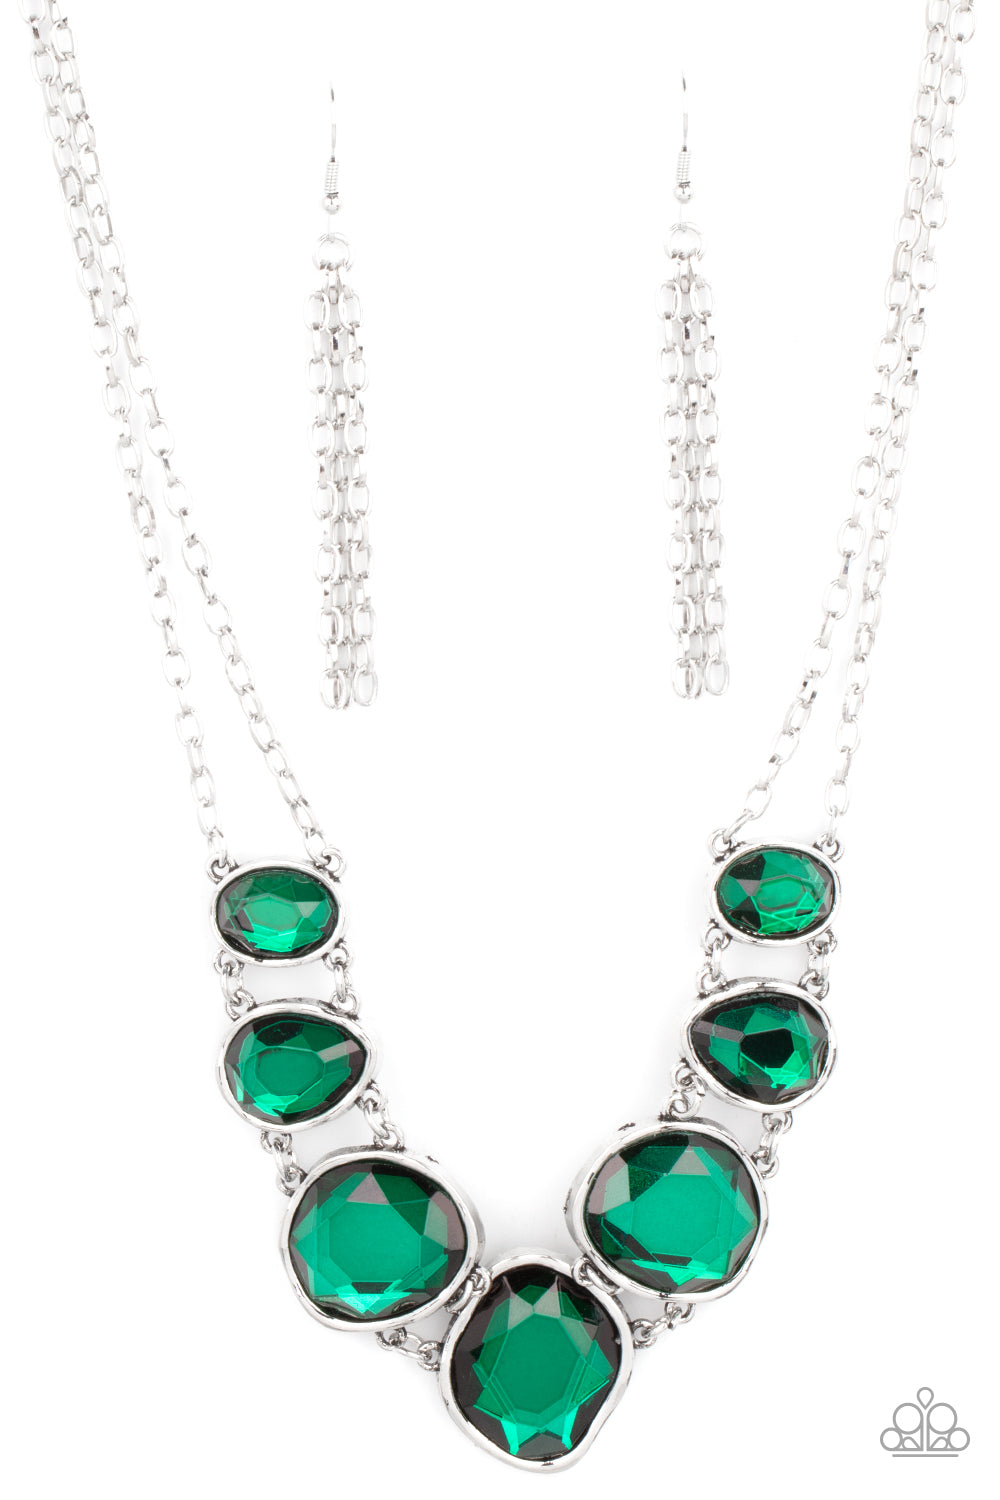 Absolute Admiration - Green necklace